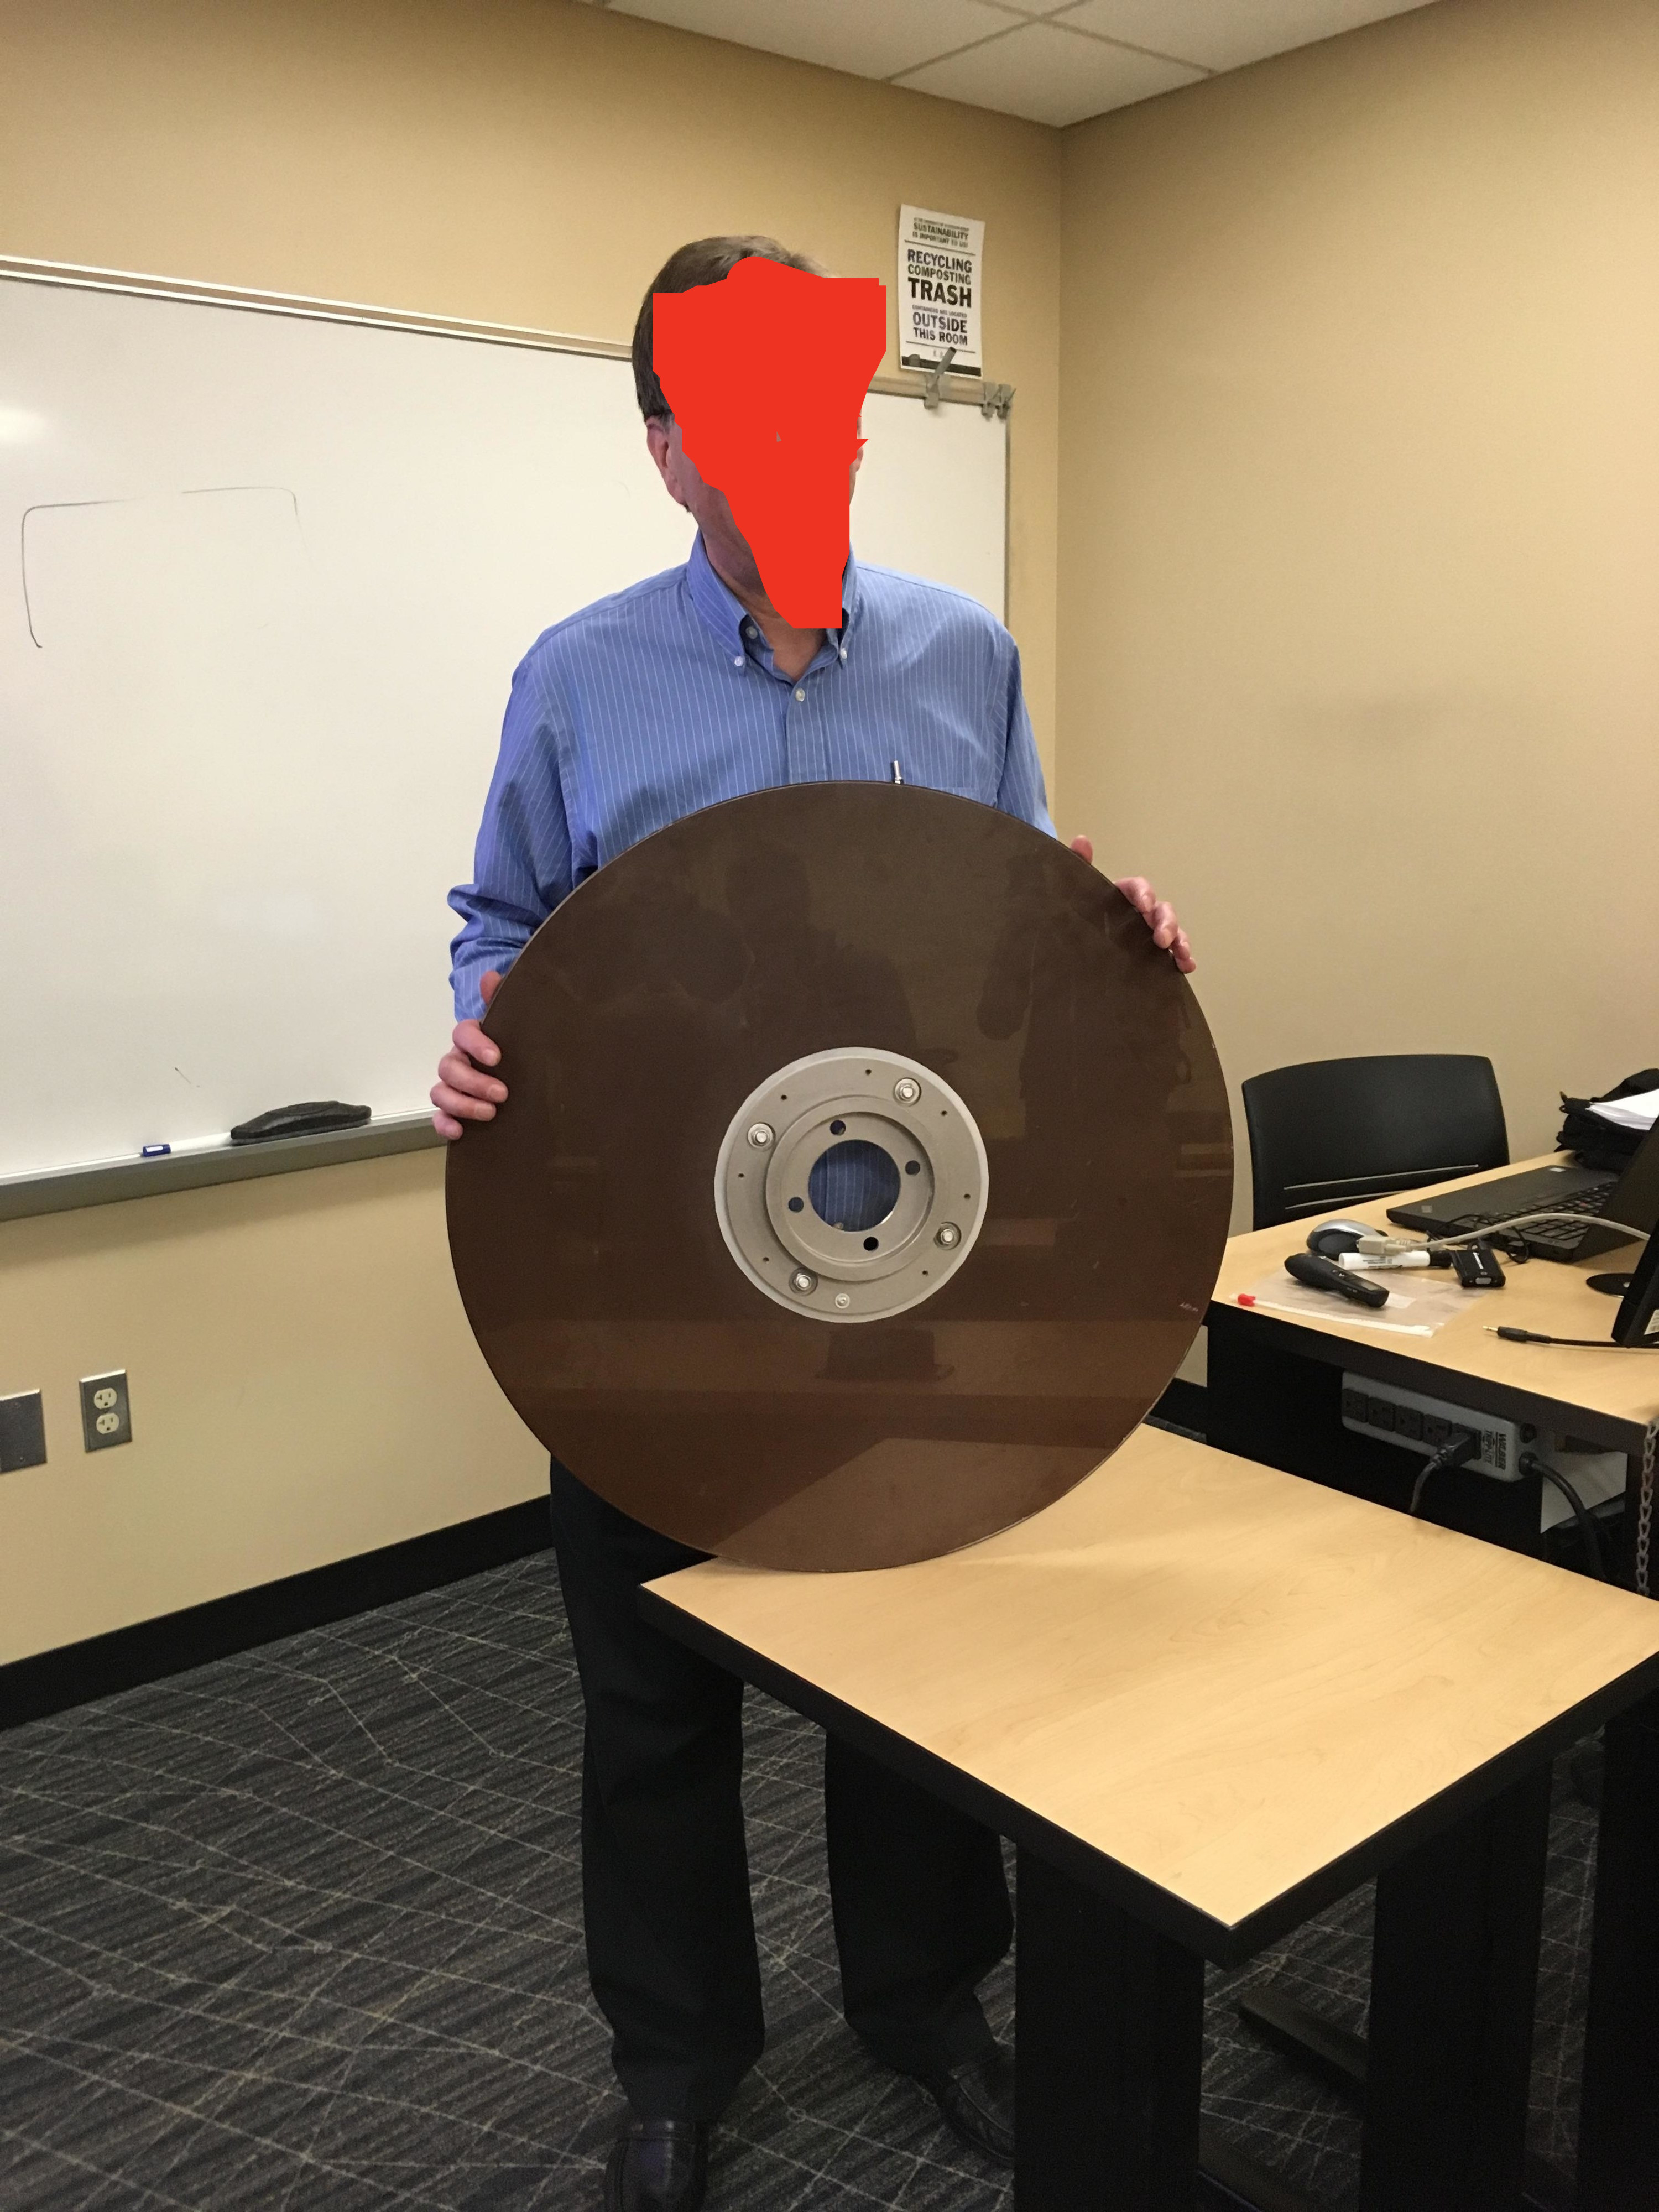 A man holding a disc whose diameter is wider than his torso